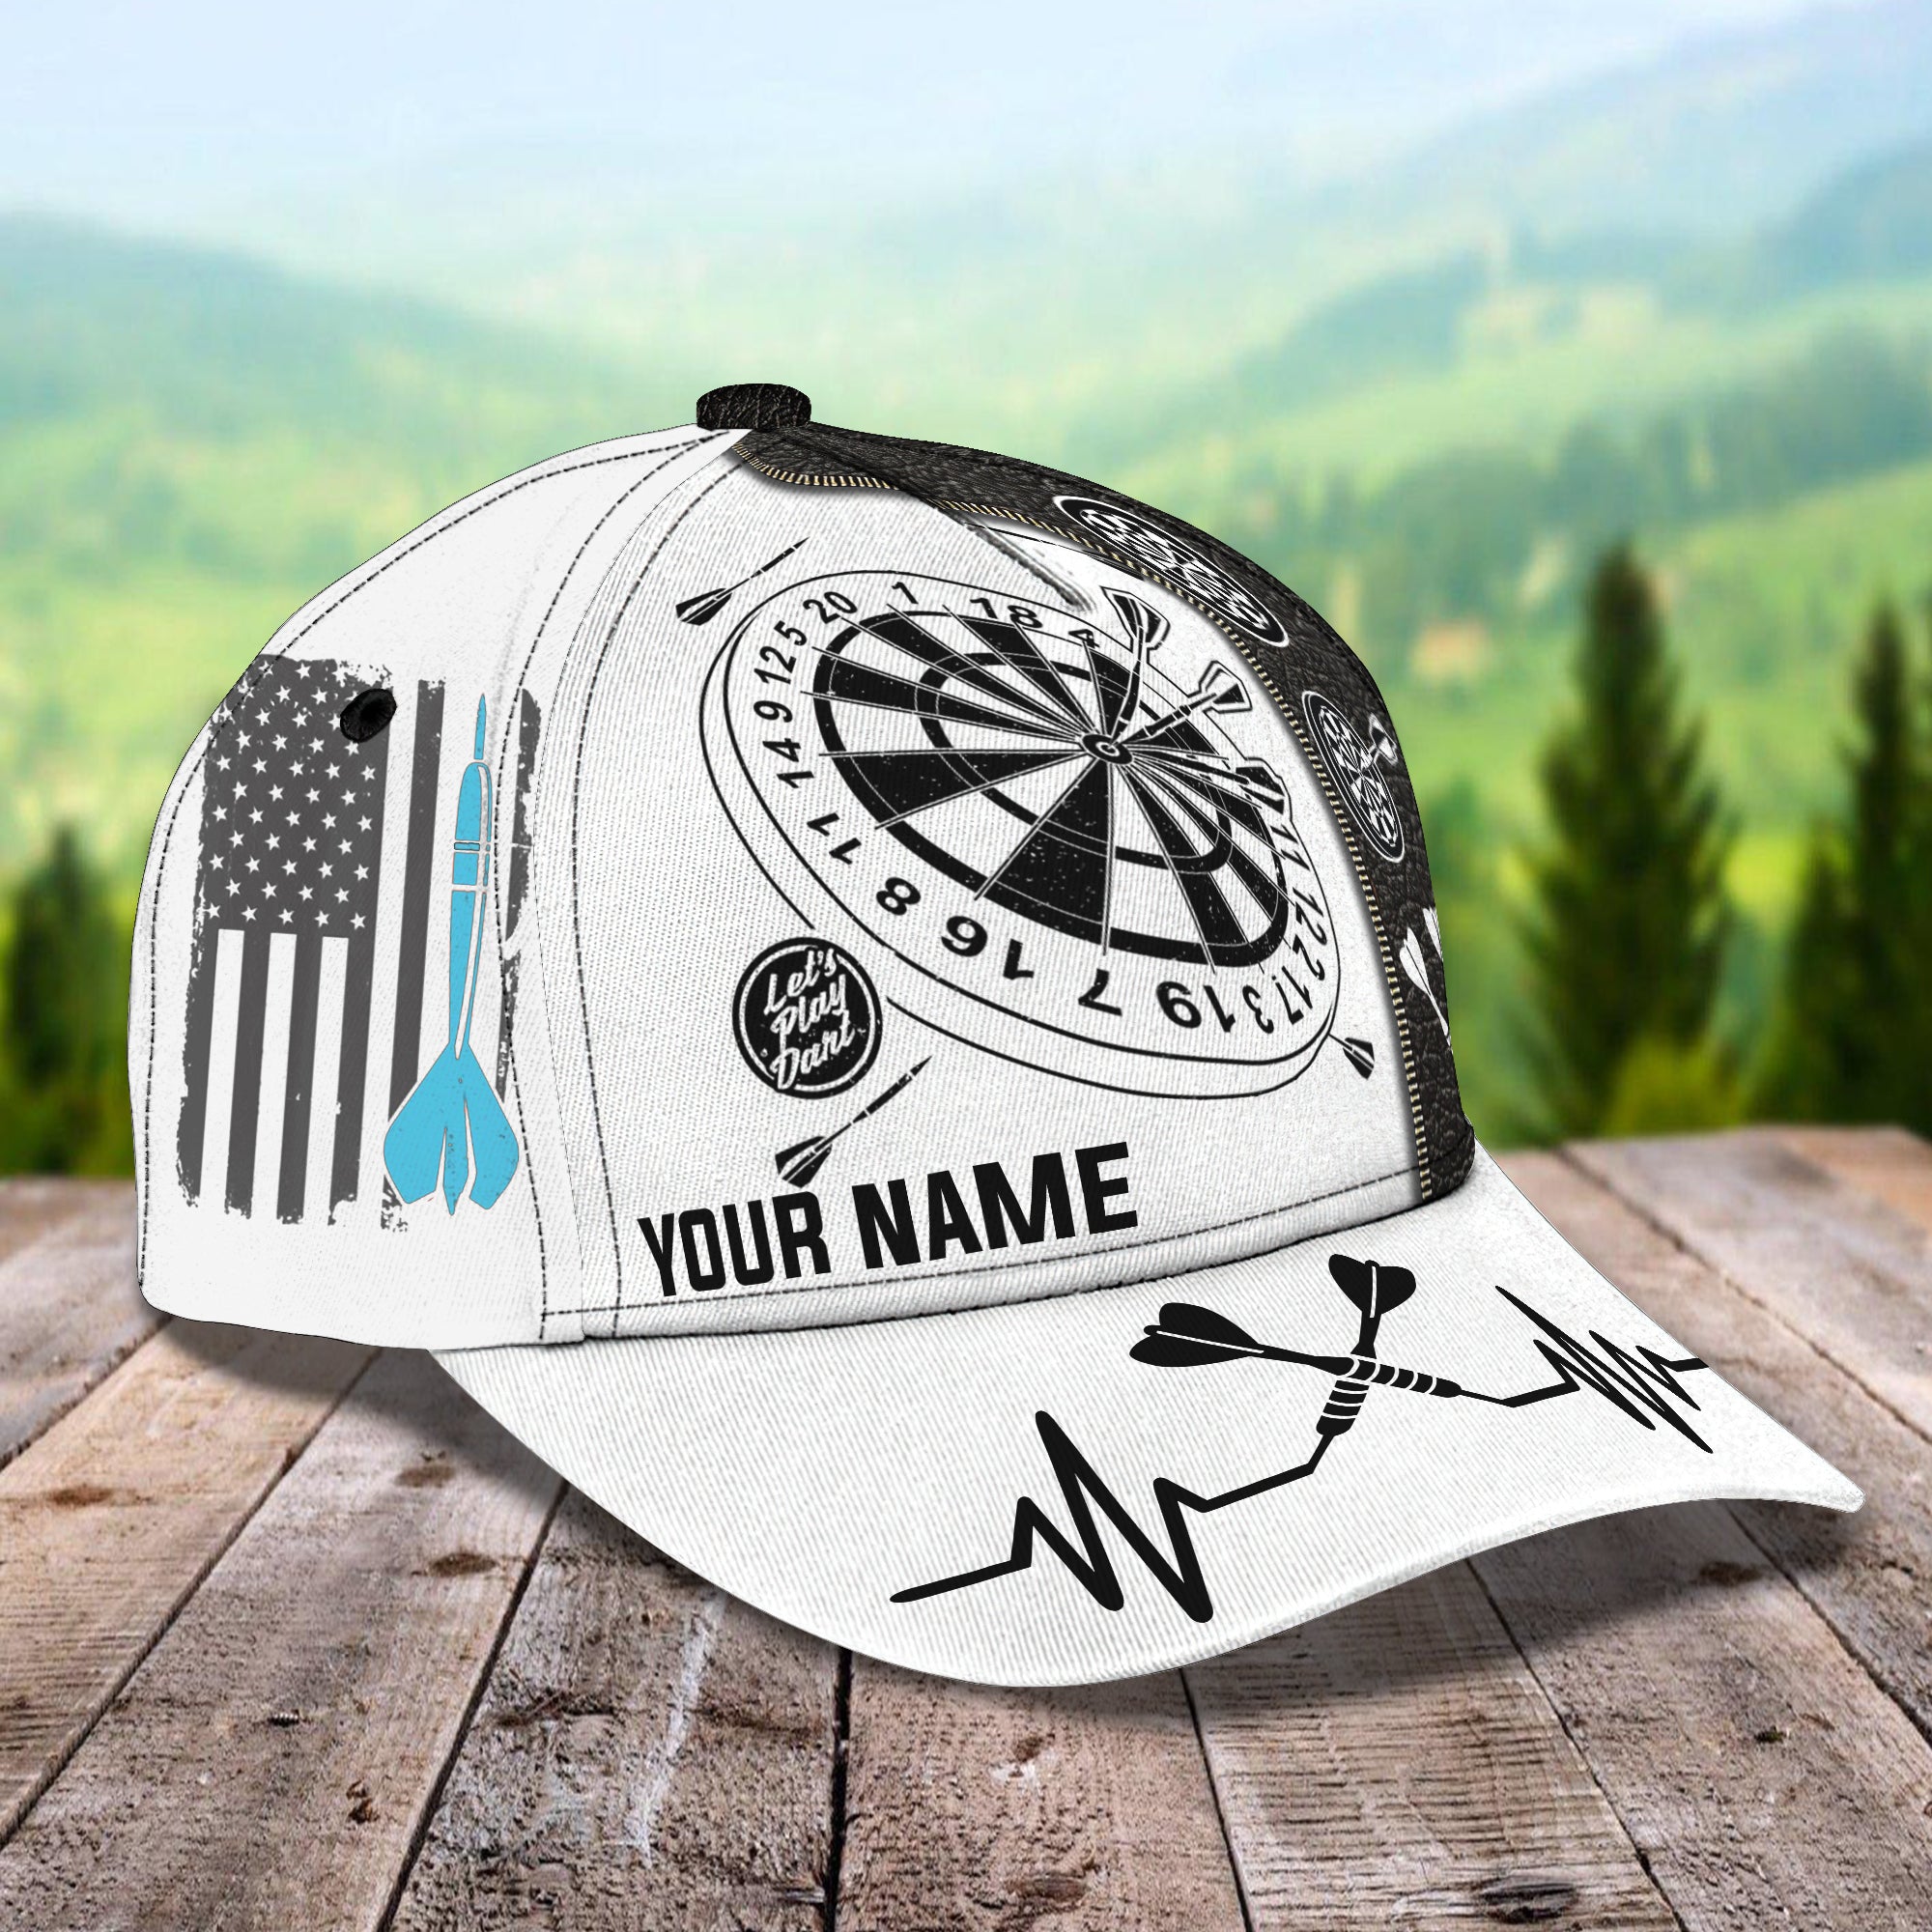 Let's Play Darts - Personalized Name Cap - Urt96